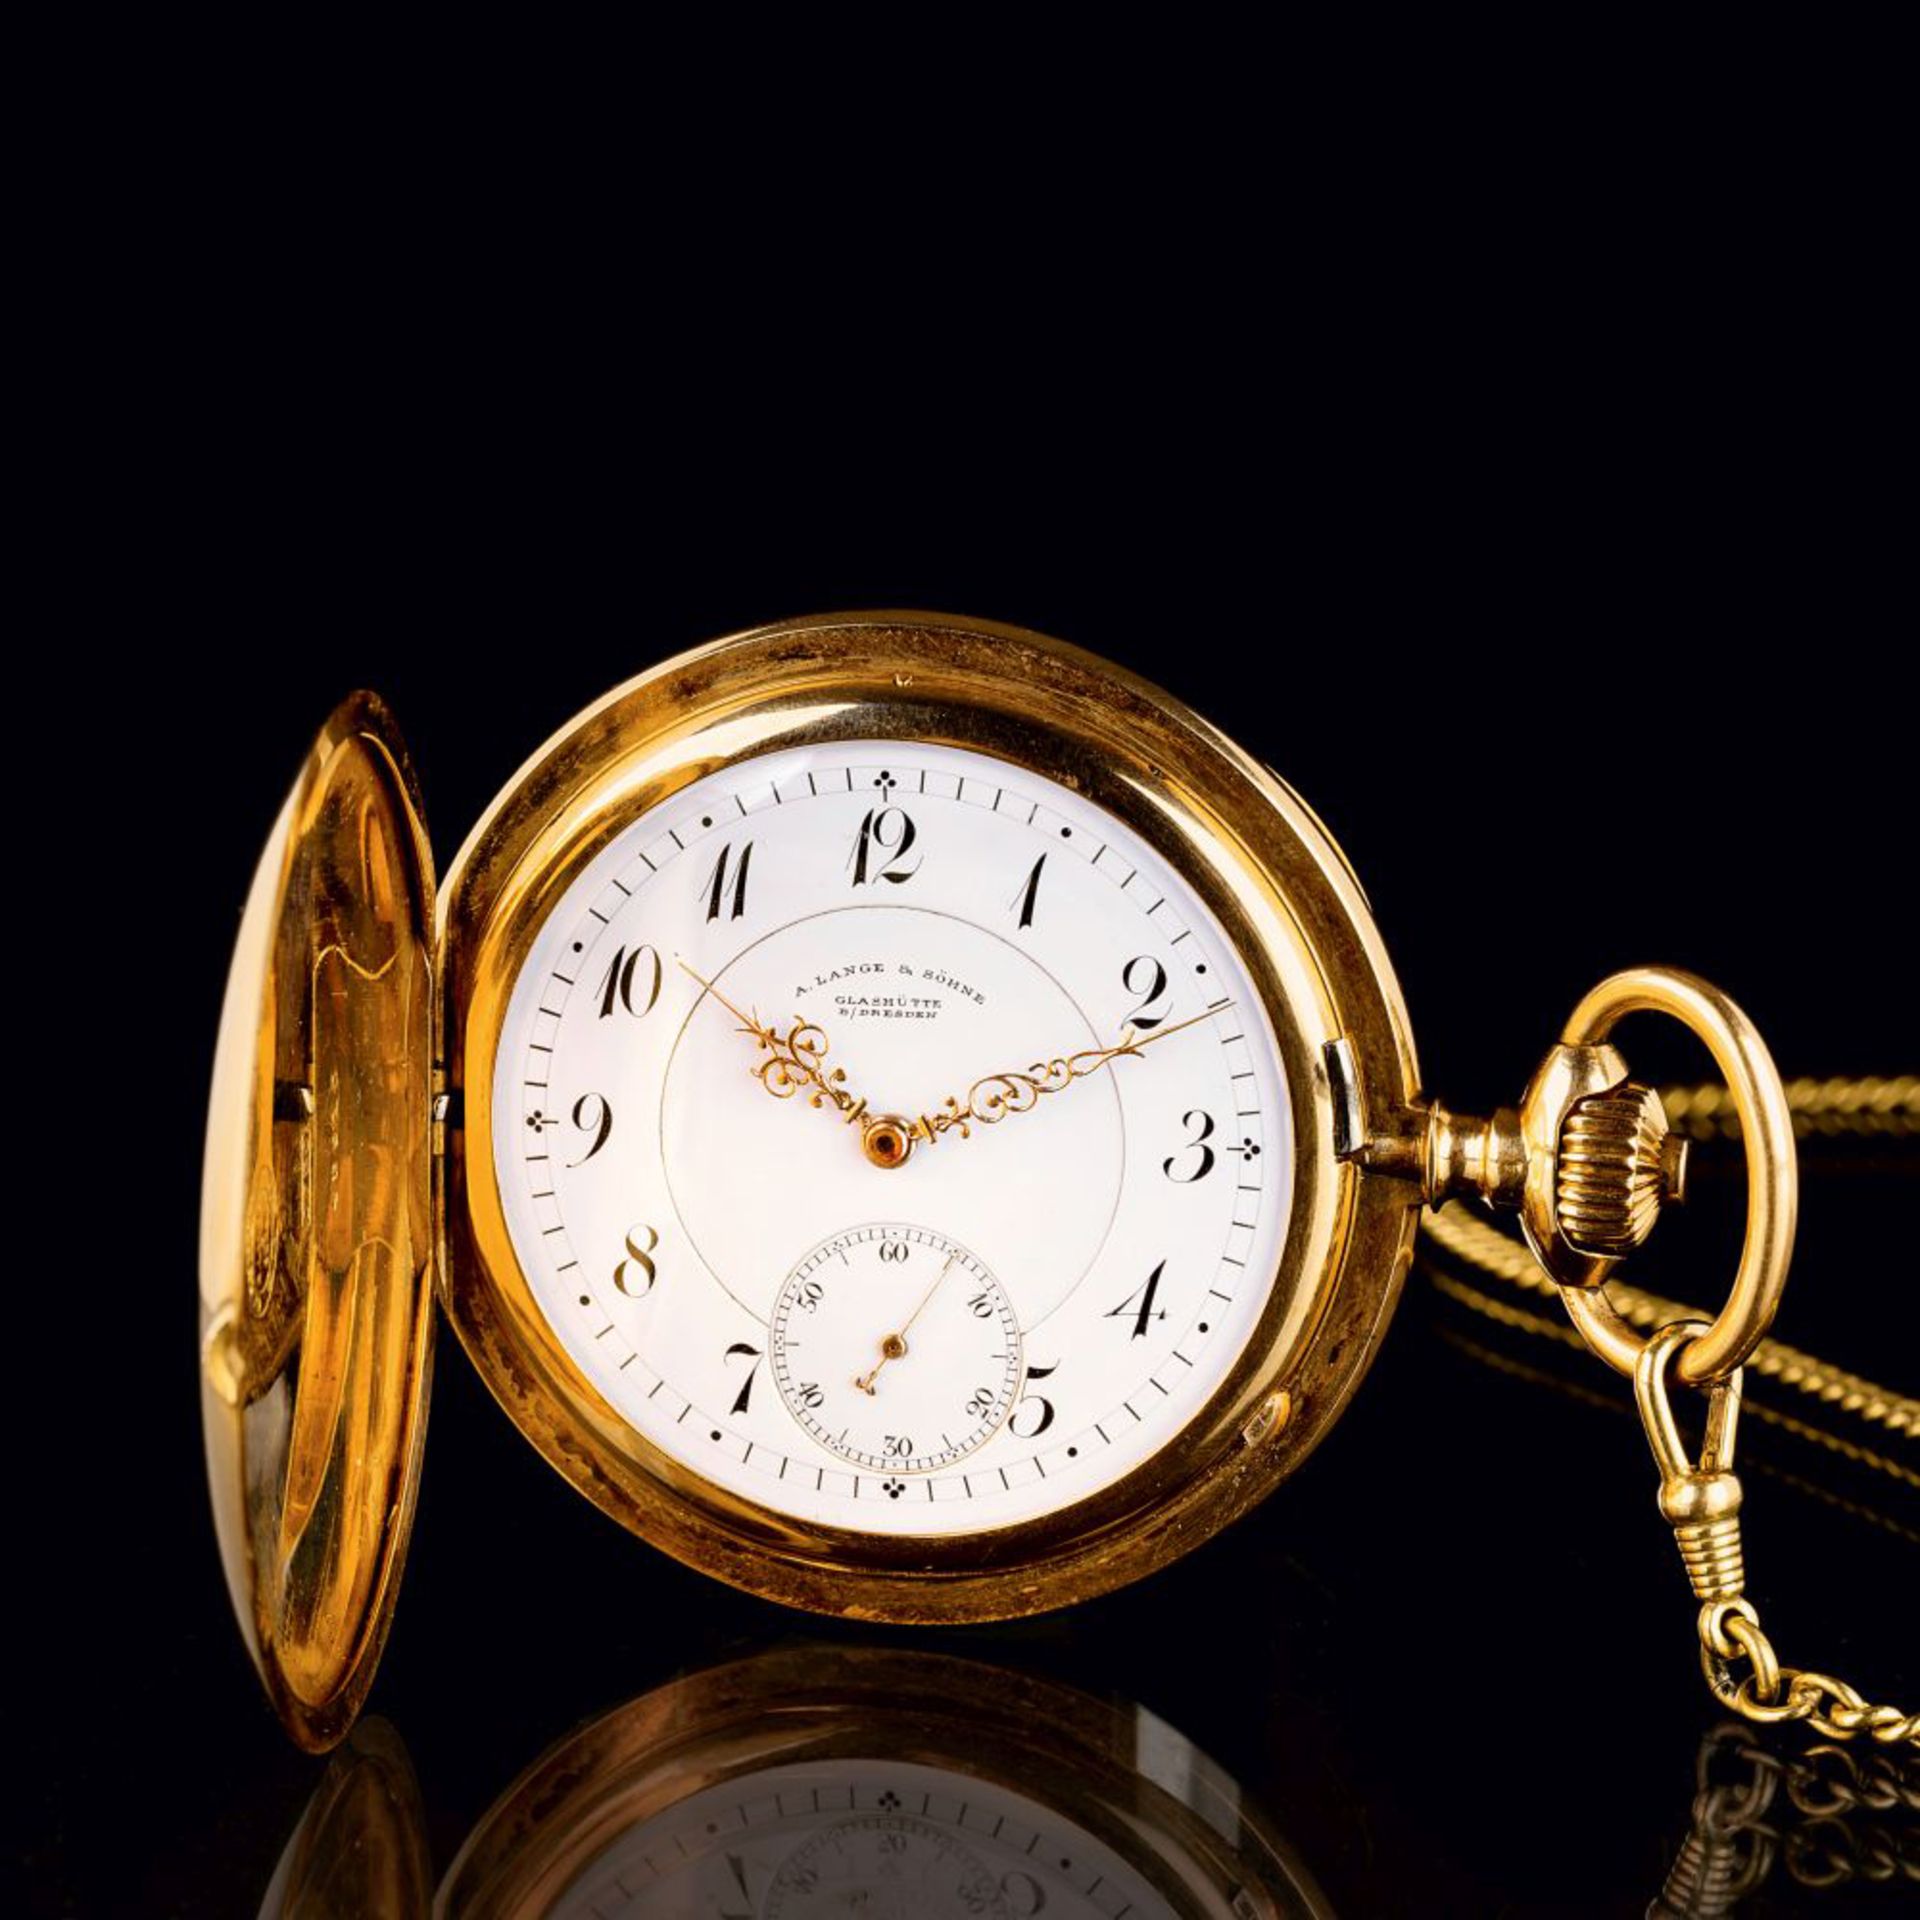 Lange & Söhne, A. est. 1845 in Glashütte. A Pocketwatch with Small Second.